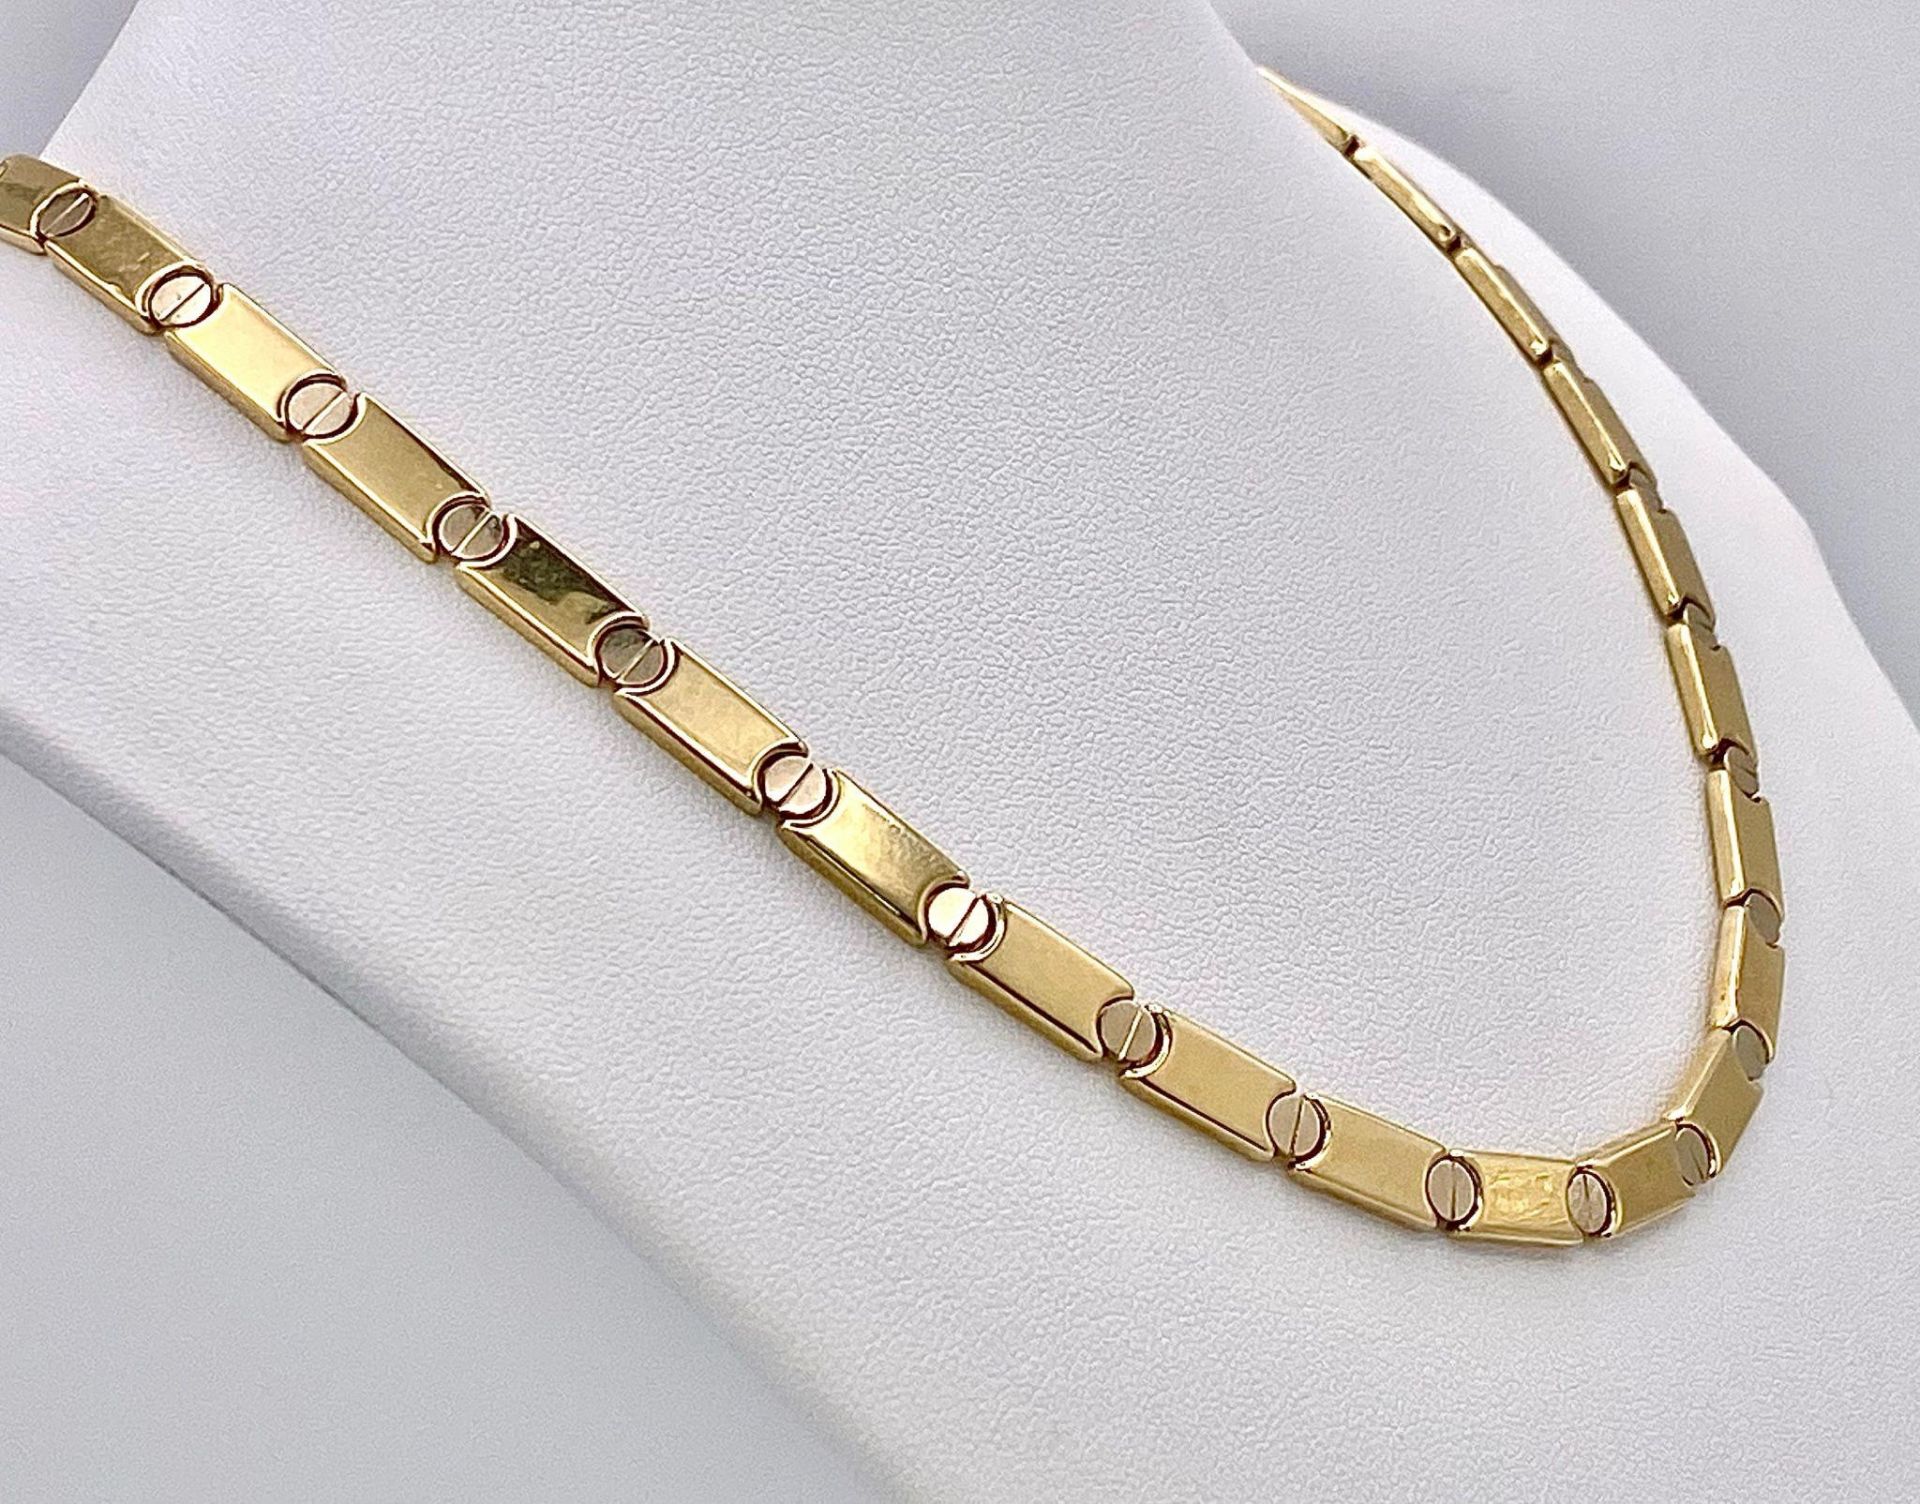 A 14k Yellow Gold Articulated Bar-Link Necklace. Stylish links with screw-esque spacers. 42cm - Bild 4 aus 12